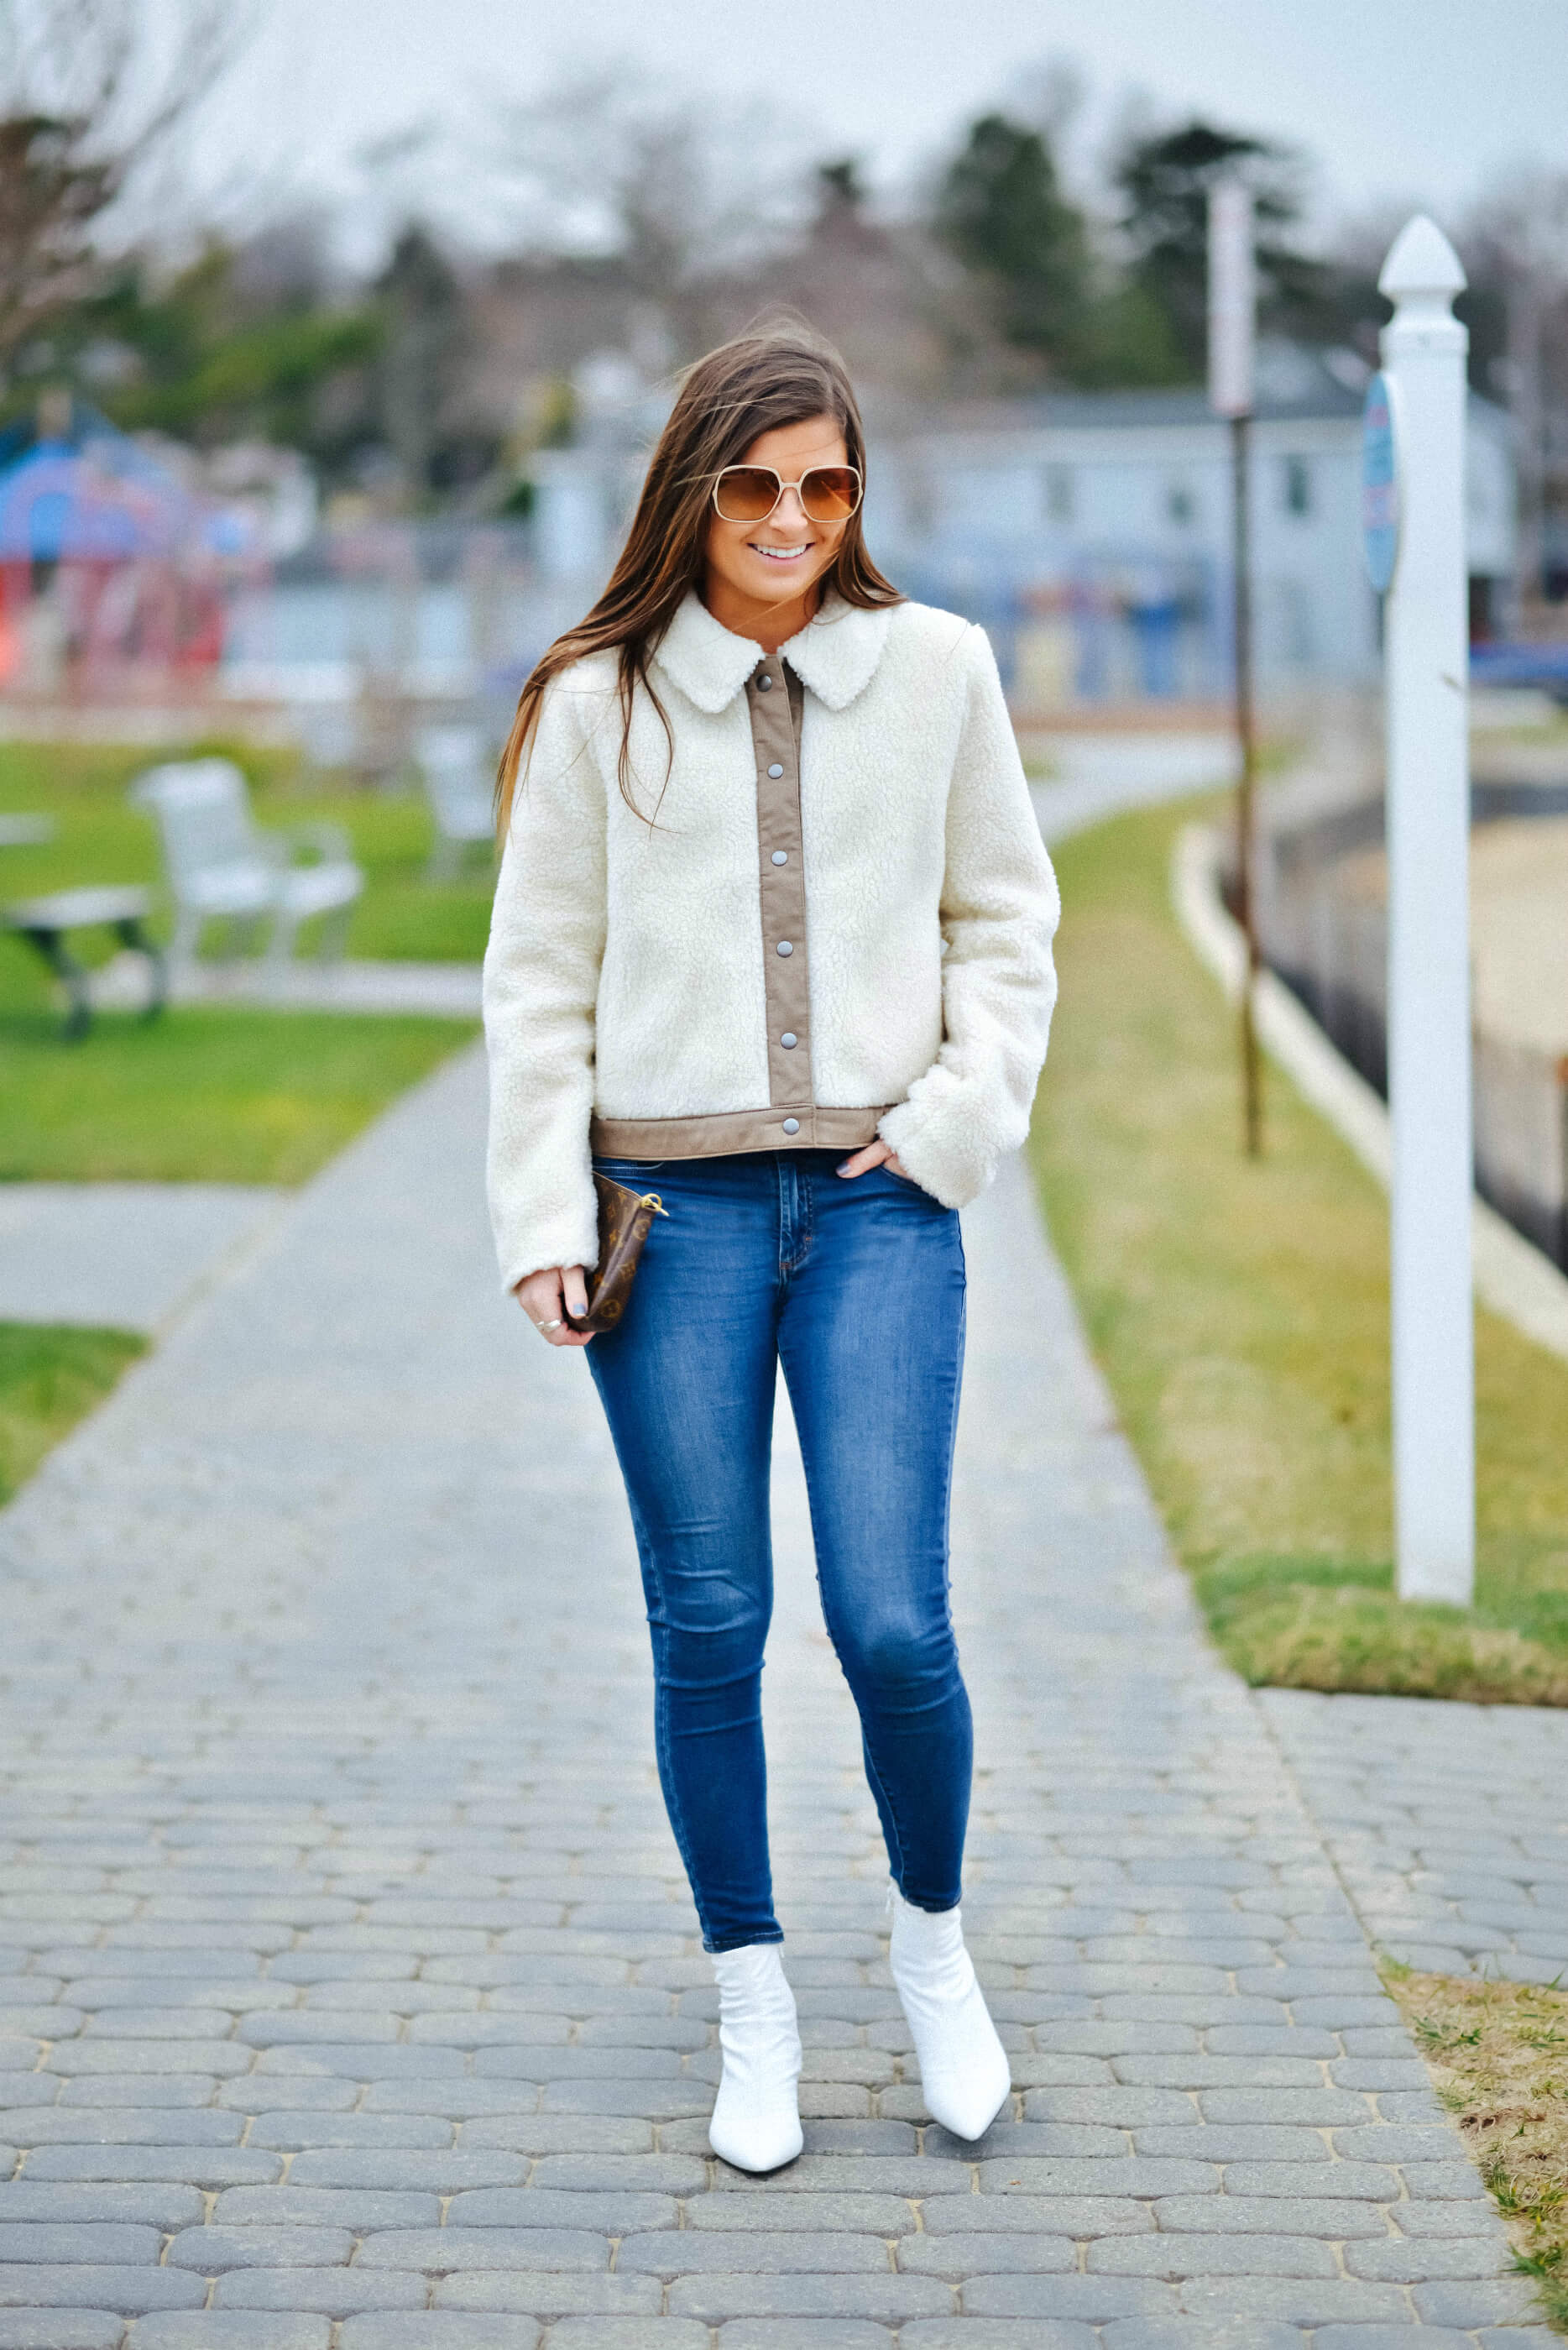 Madewell Sherpa Portland Jacket, White Booties, Winter Style, Henri Bendel Piper Sunglasses, Tilden of To Be Bright